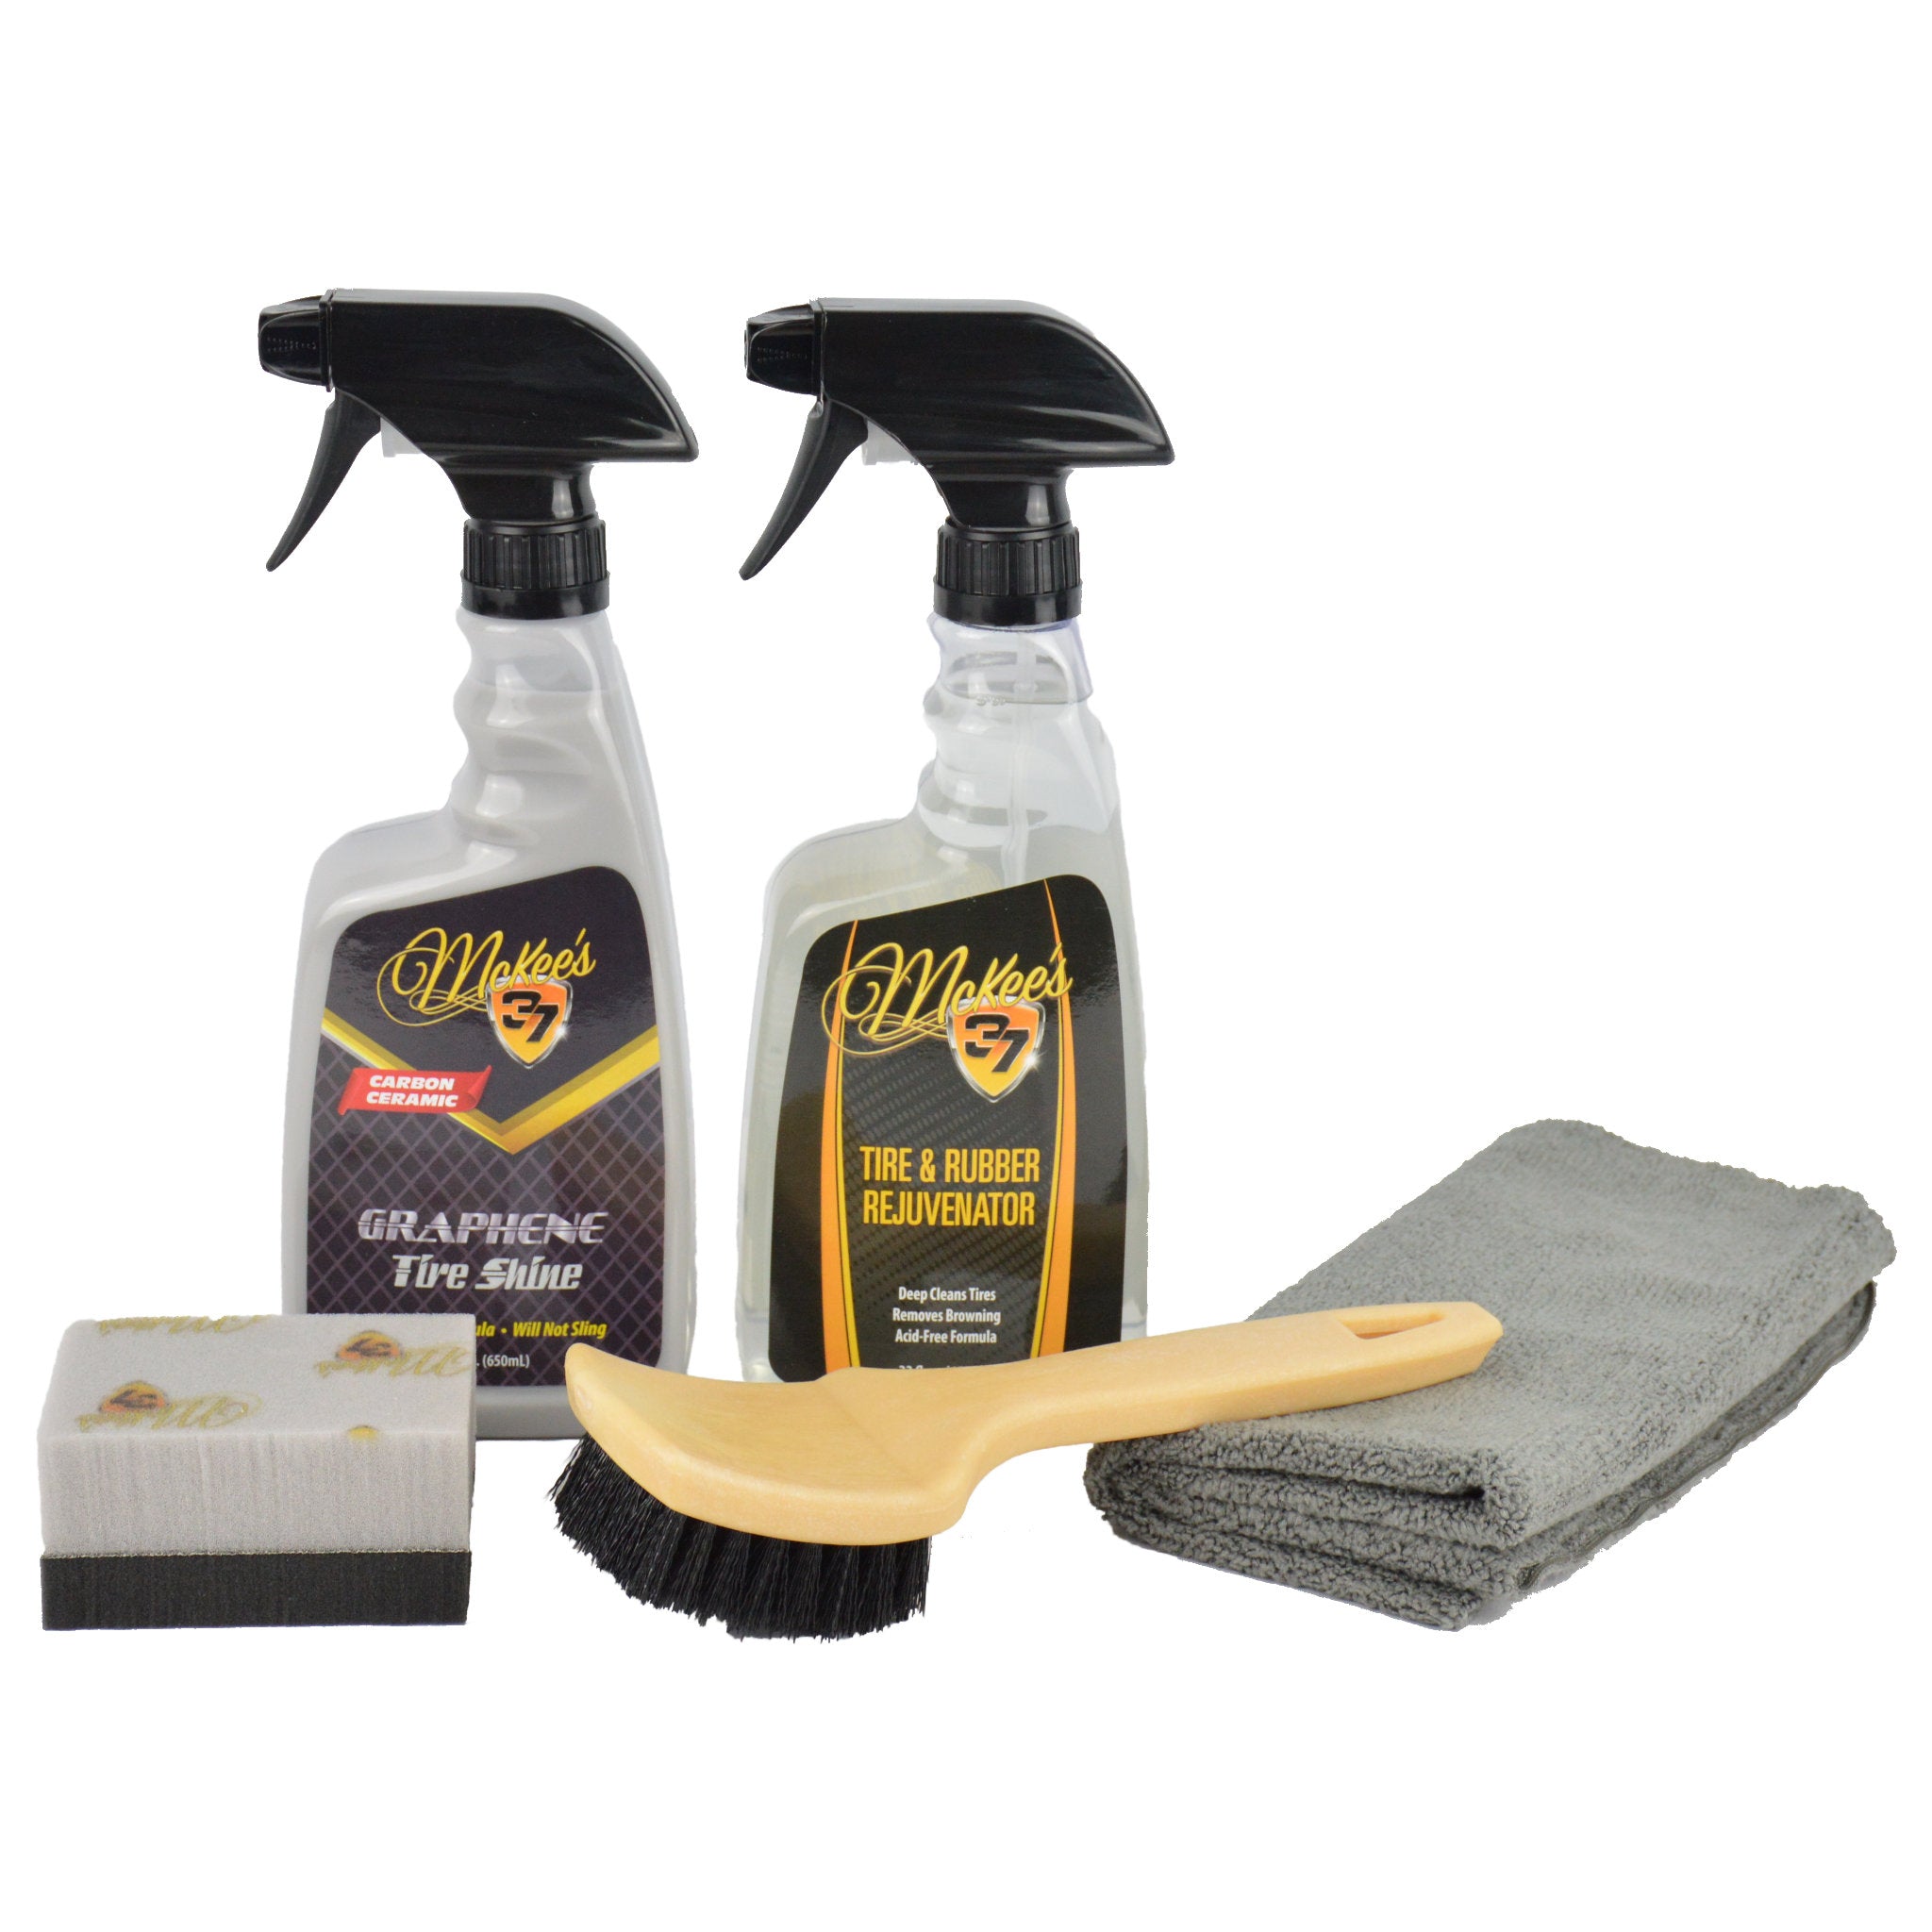 Meguiar's Ultimate Tyre Shine Tyre Coating - Product Profiles